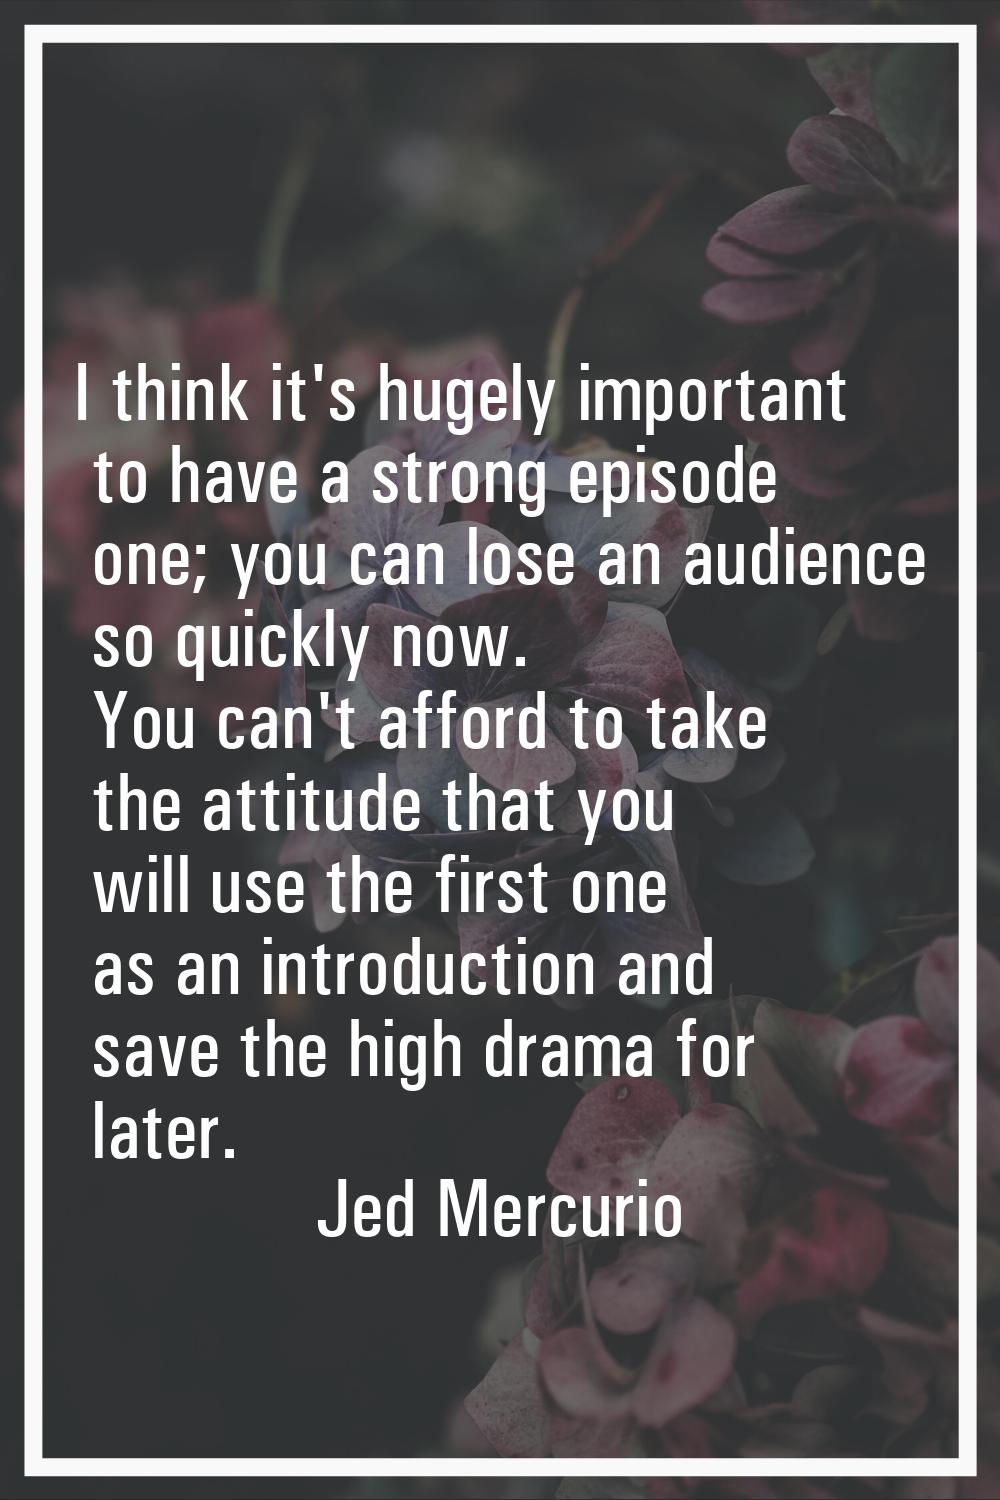 I think it's hugely important to have a strong episode one; you can lose an audience so quickly now